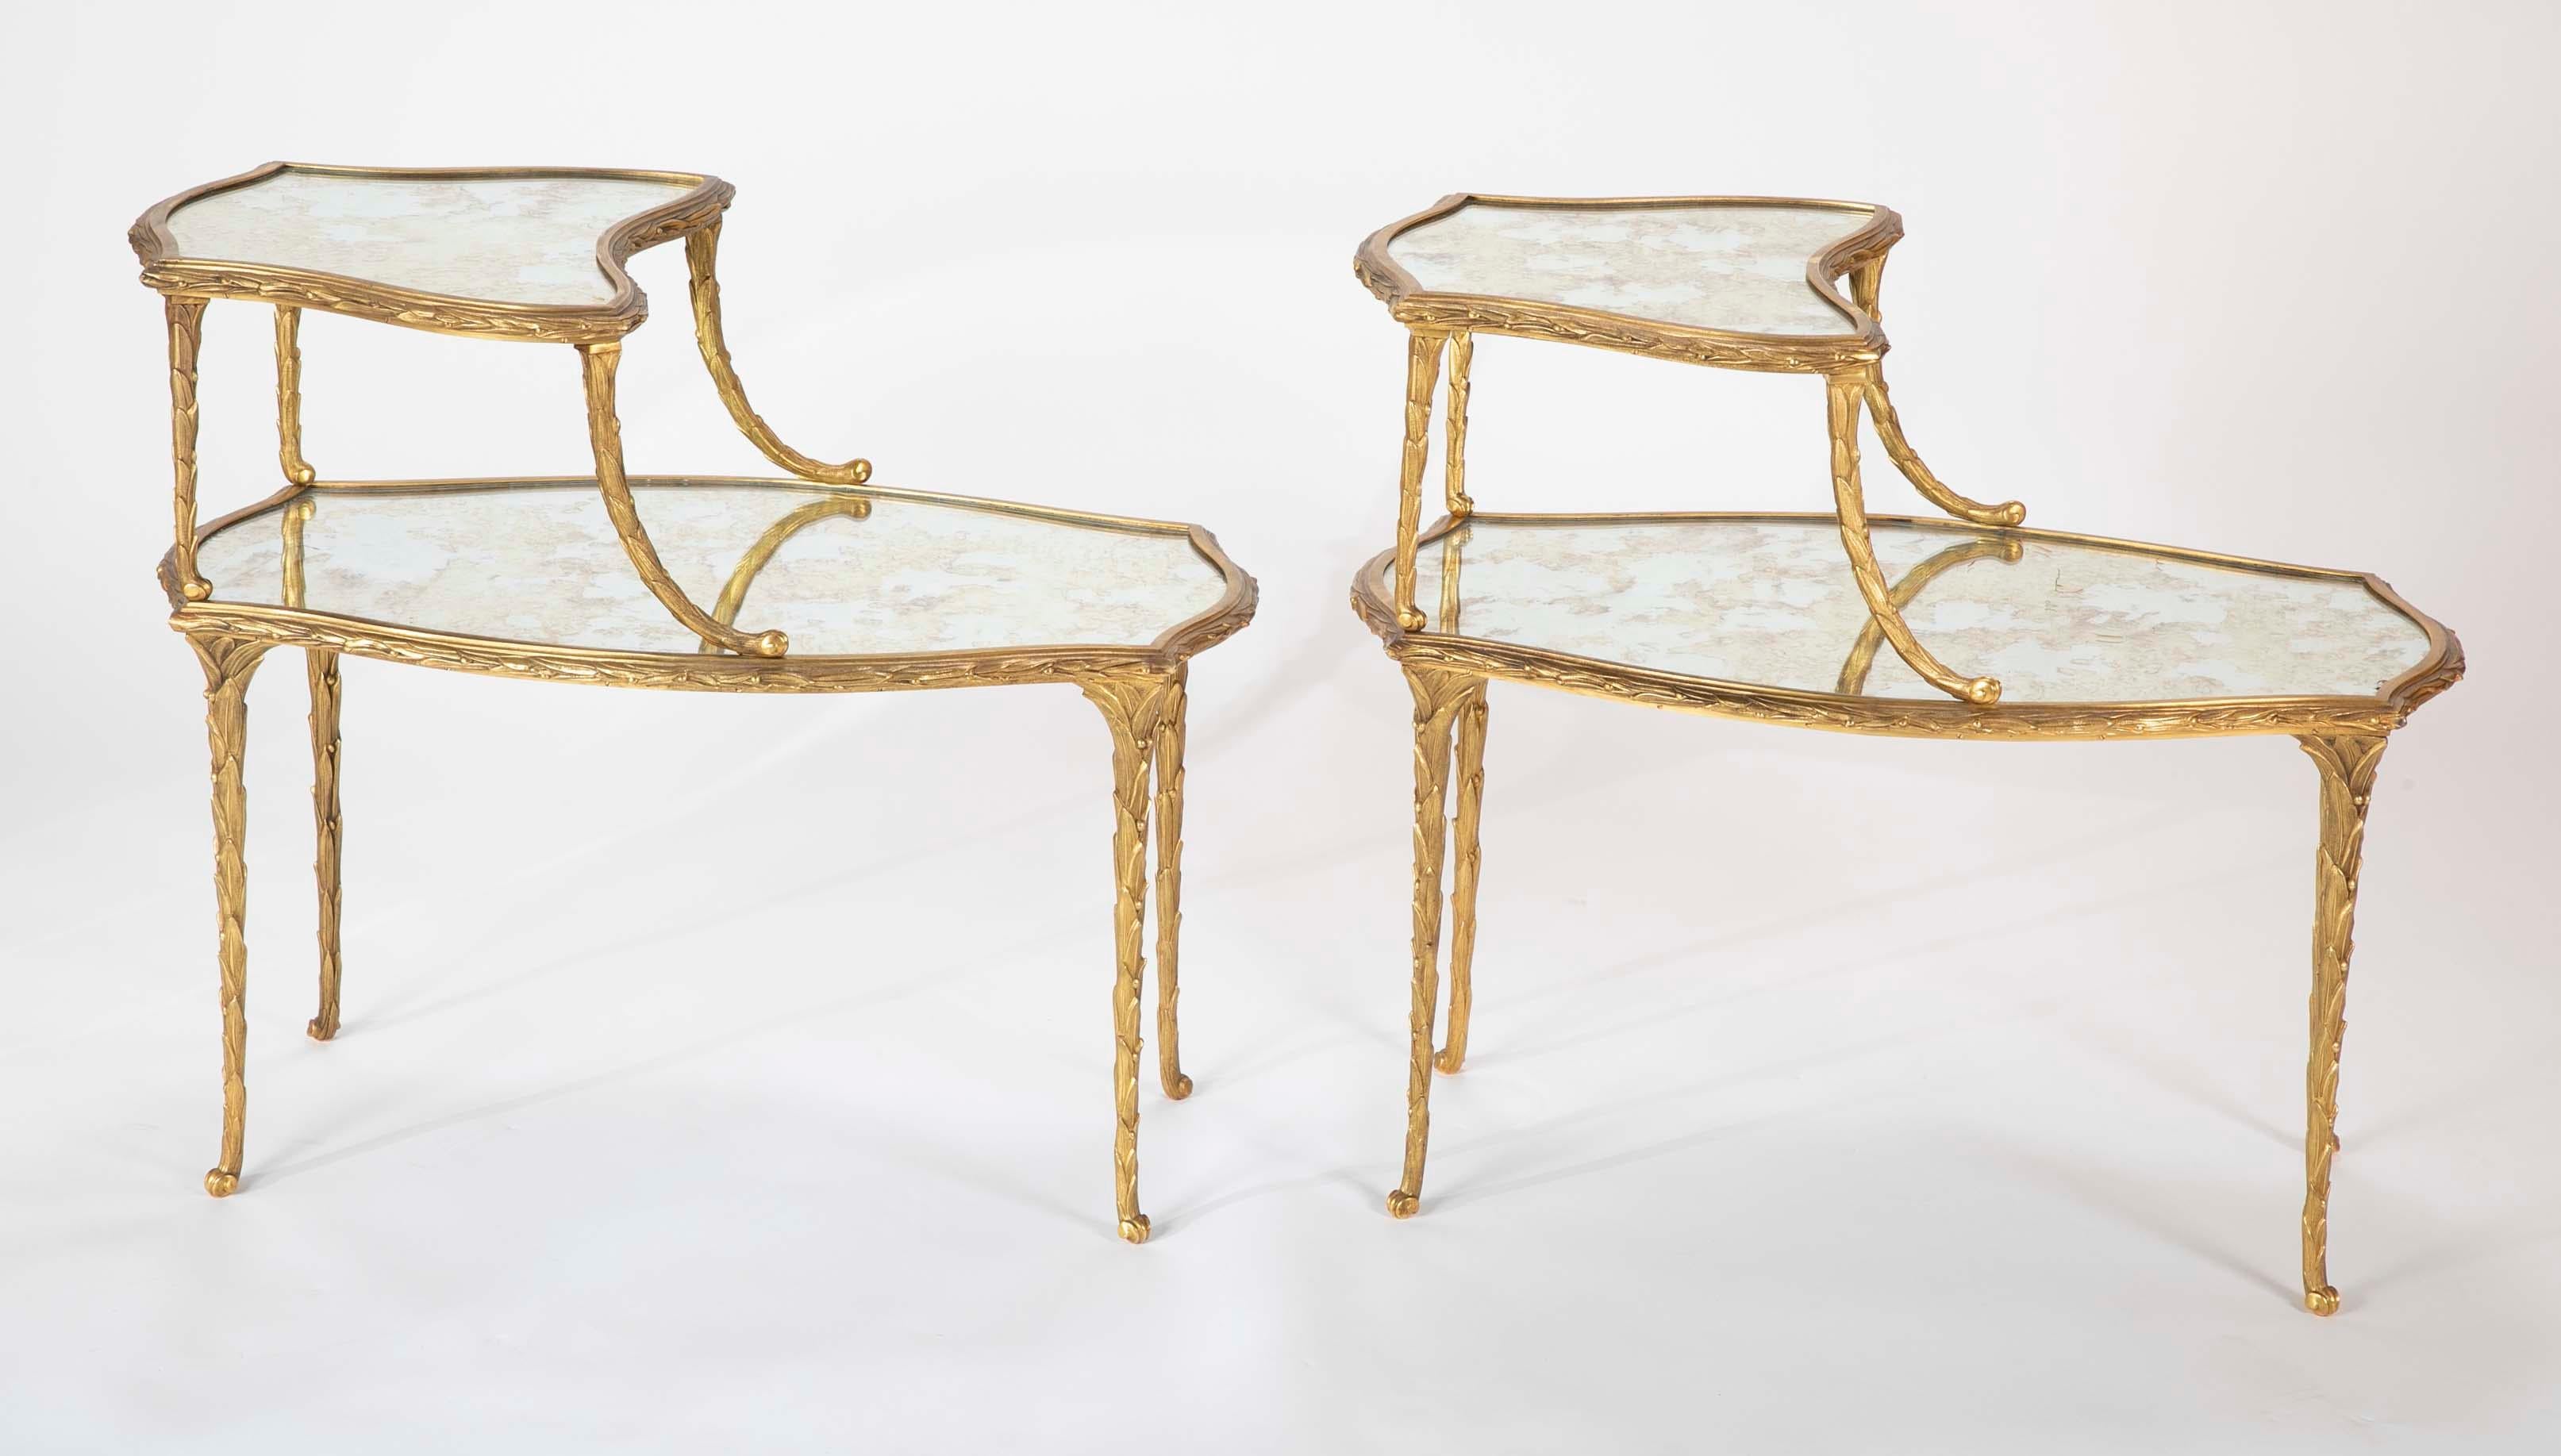 A fabulous pair of finely chased two tier bronze Maison Charles side tables having mirror tops.